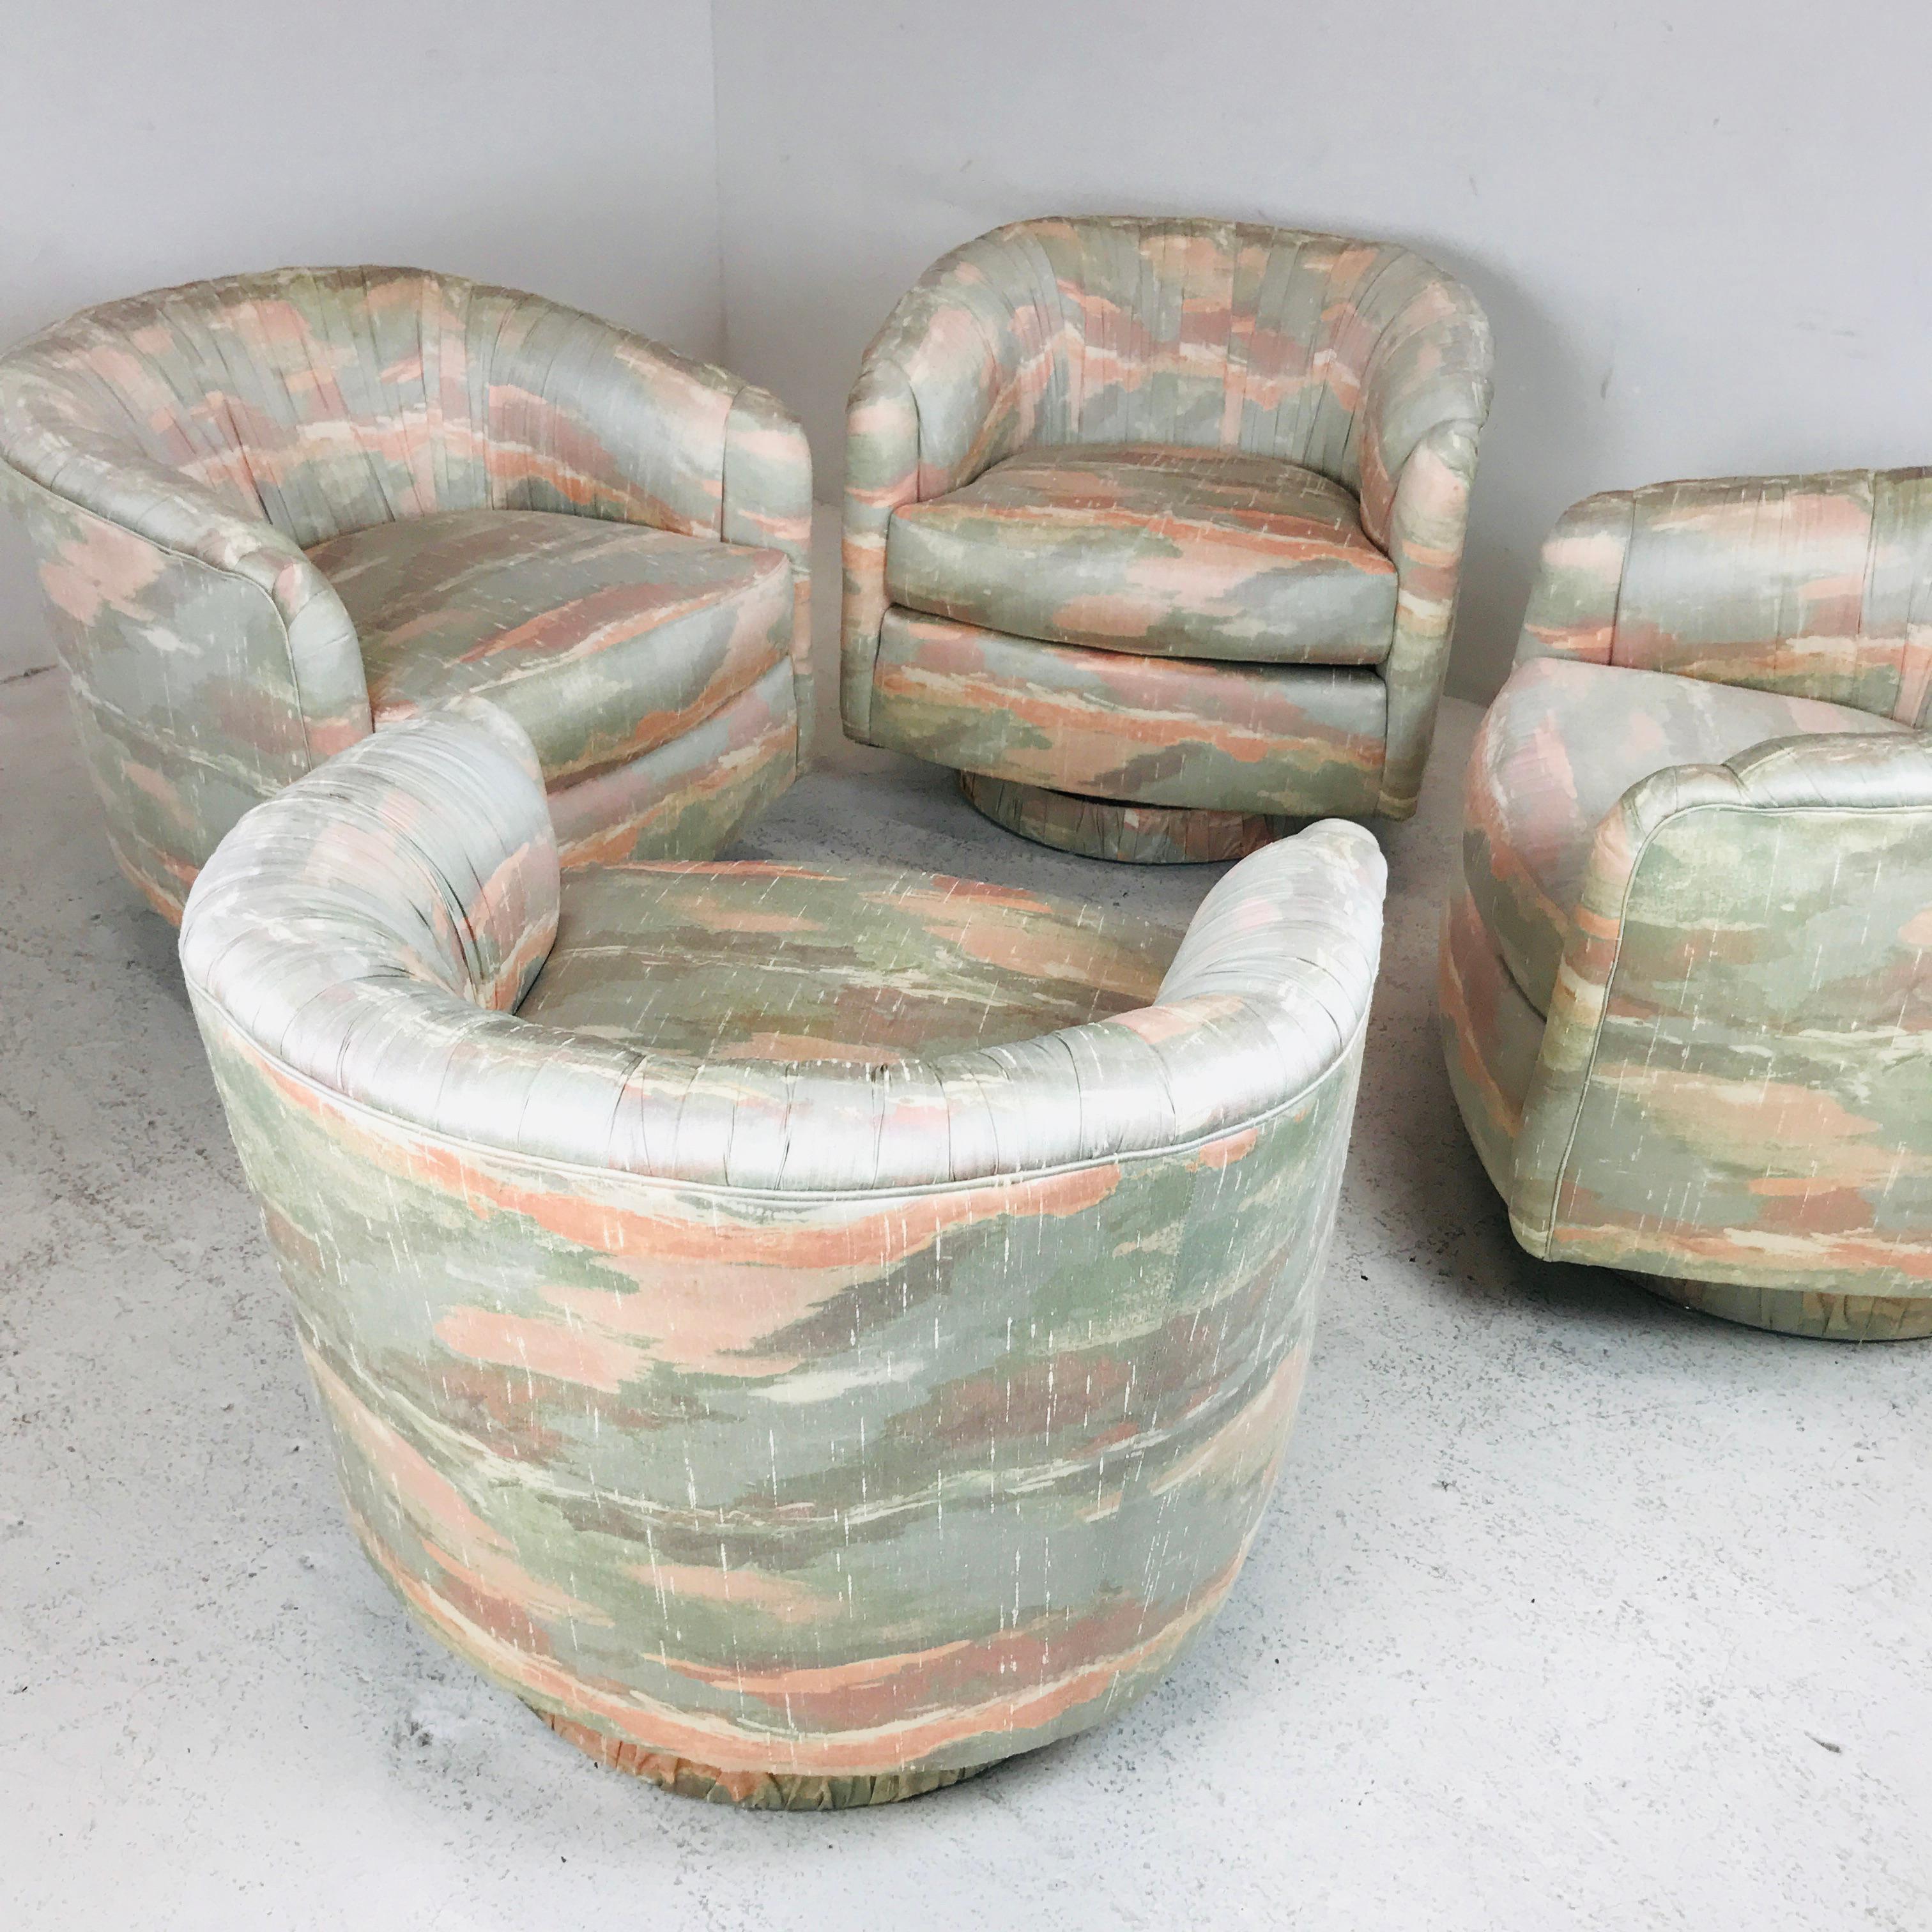 This set of 4 vintage Dansen lounge chairs features 360-degree swivel, plinth base, and comfortable design. Stylish Mid-Century Modern design in the style of Milo Baughman.